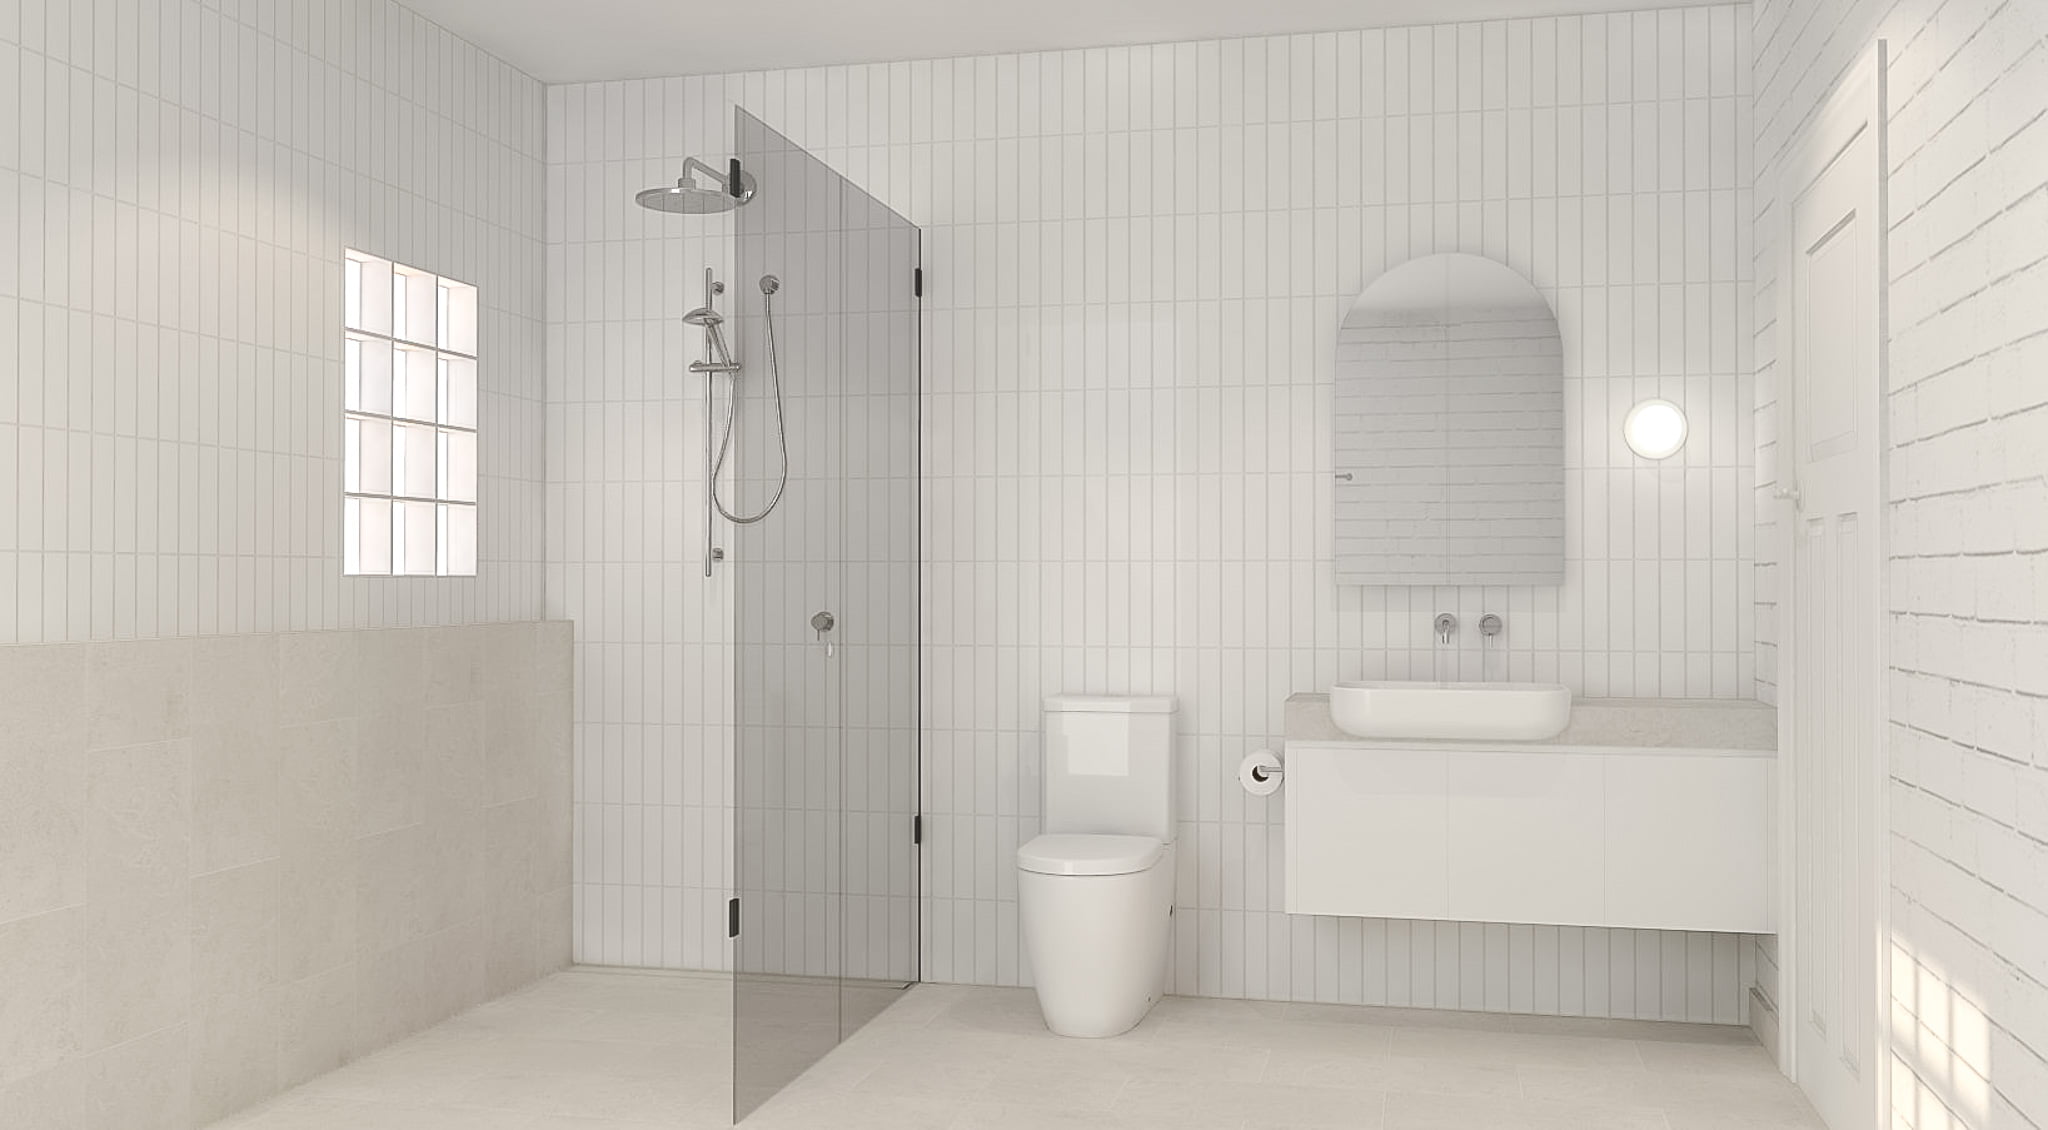 Contemporary bathroom design render featuring walk in shower, ledge wall with glass brick window, a toilet and a white vanity with arch mirror cabinet.